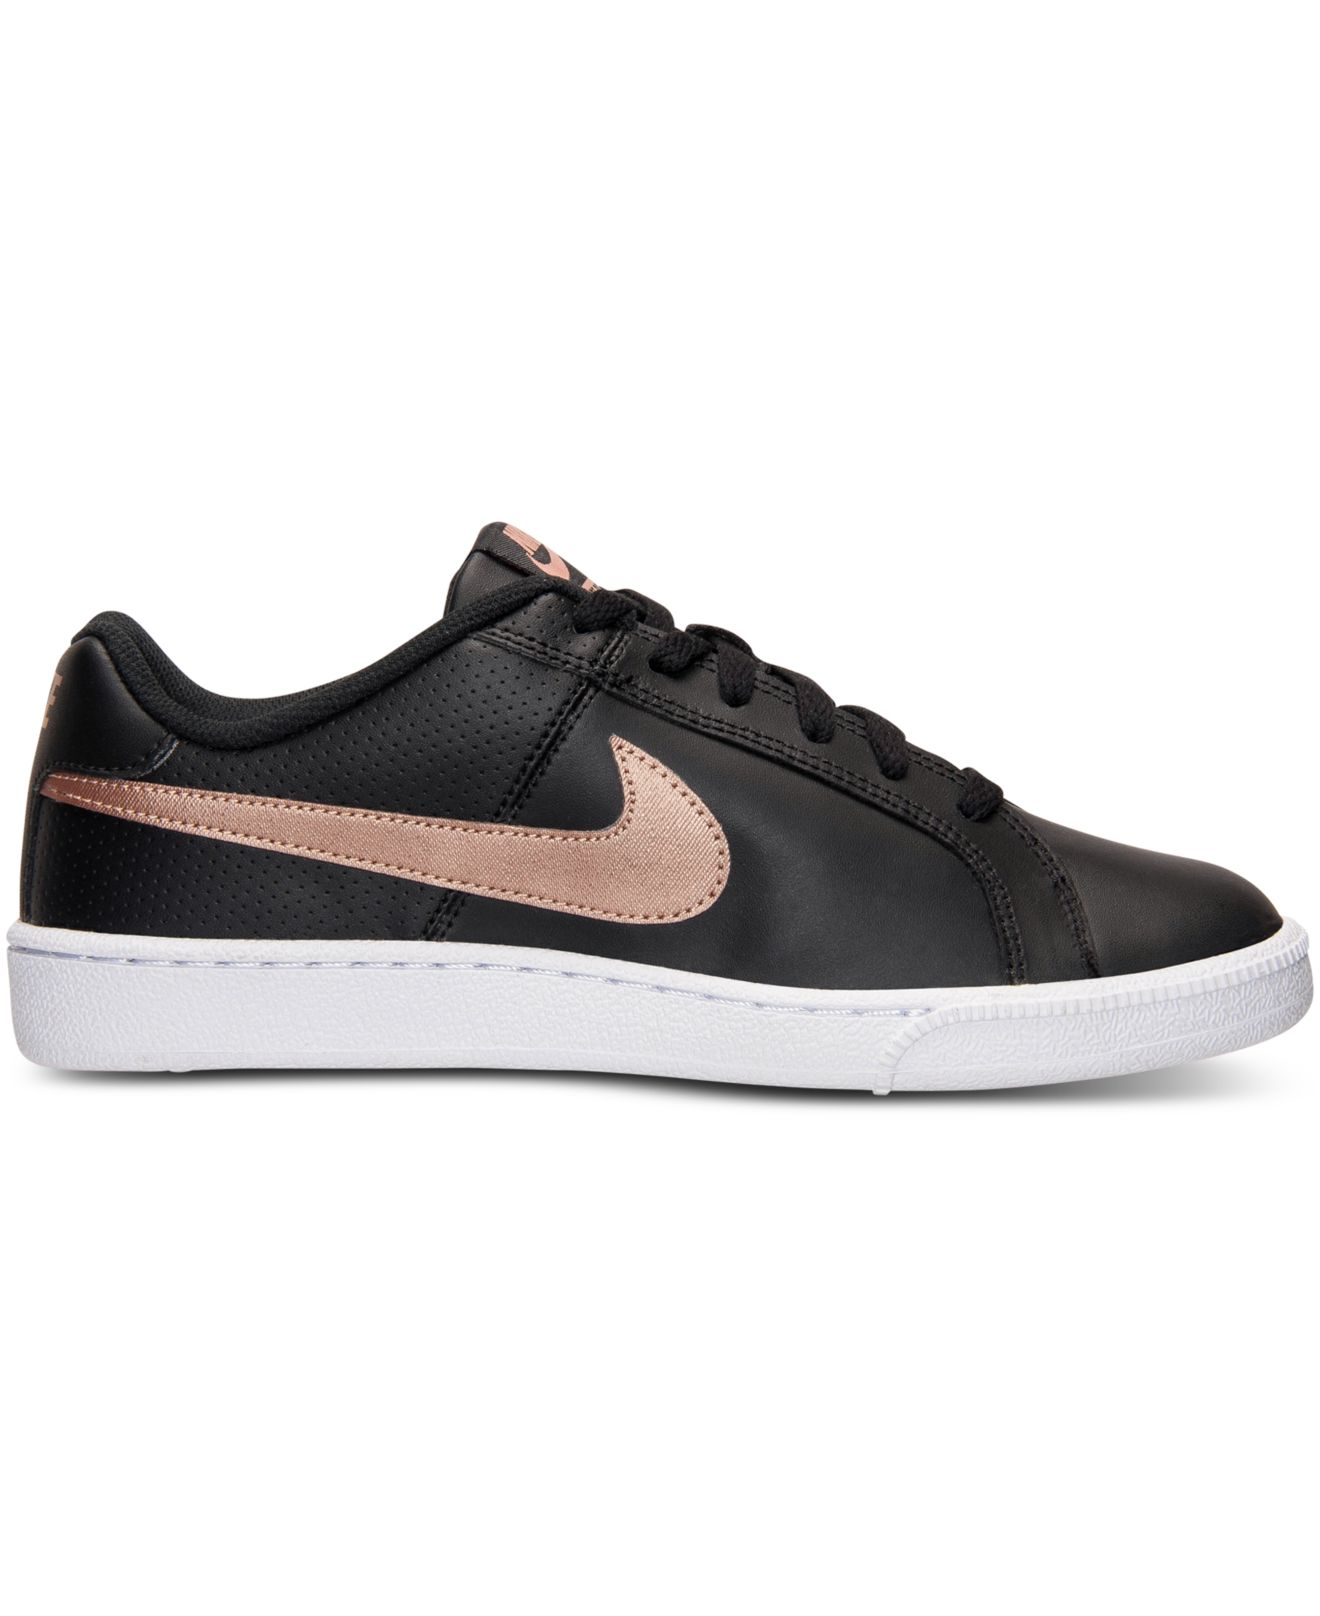 Lyst Nike Women #39 s Court Royale Casual Sneakers From Finish Line in Black